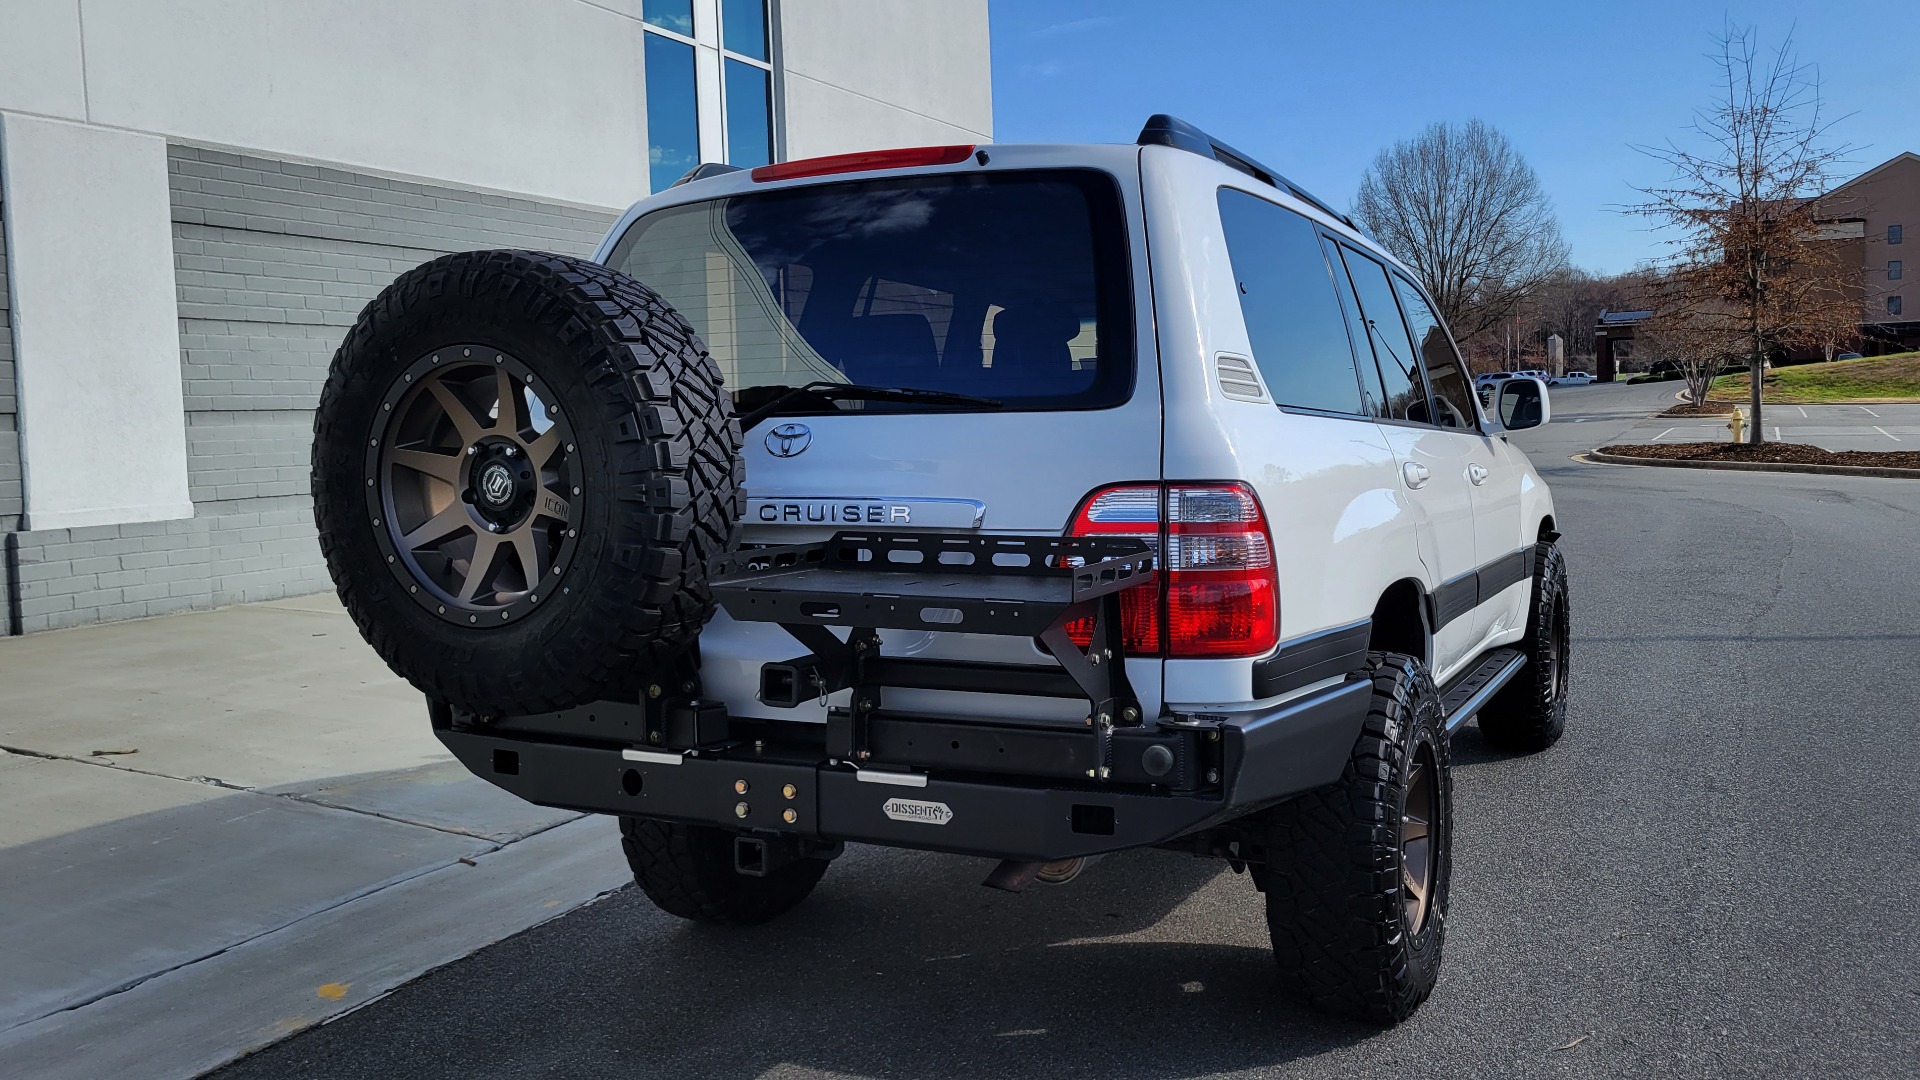 Used 2003 Toyota LAND CRUISER 4WD WAGON / 4.7L V8 / AUTO / NAVIGATION / LIFT / CUSTOM WHEELS for sale $27,999 at Formula Imports in Charlotte NC 28227 8